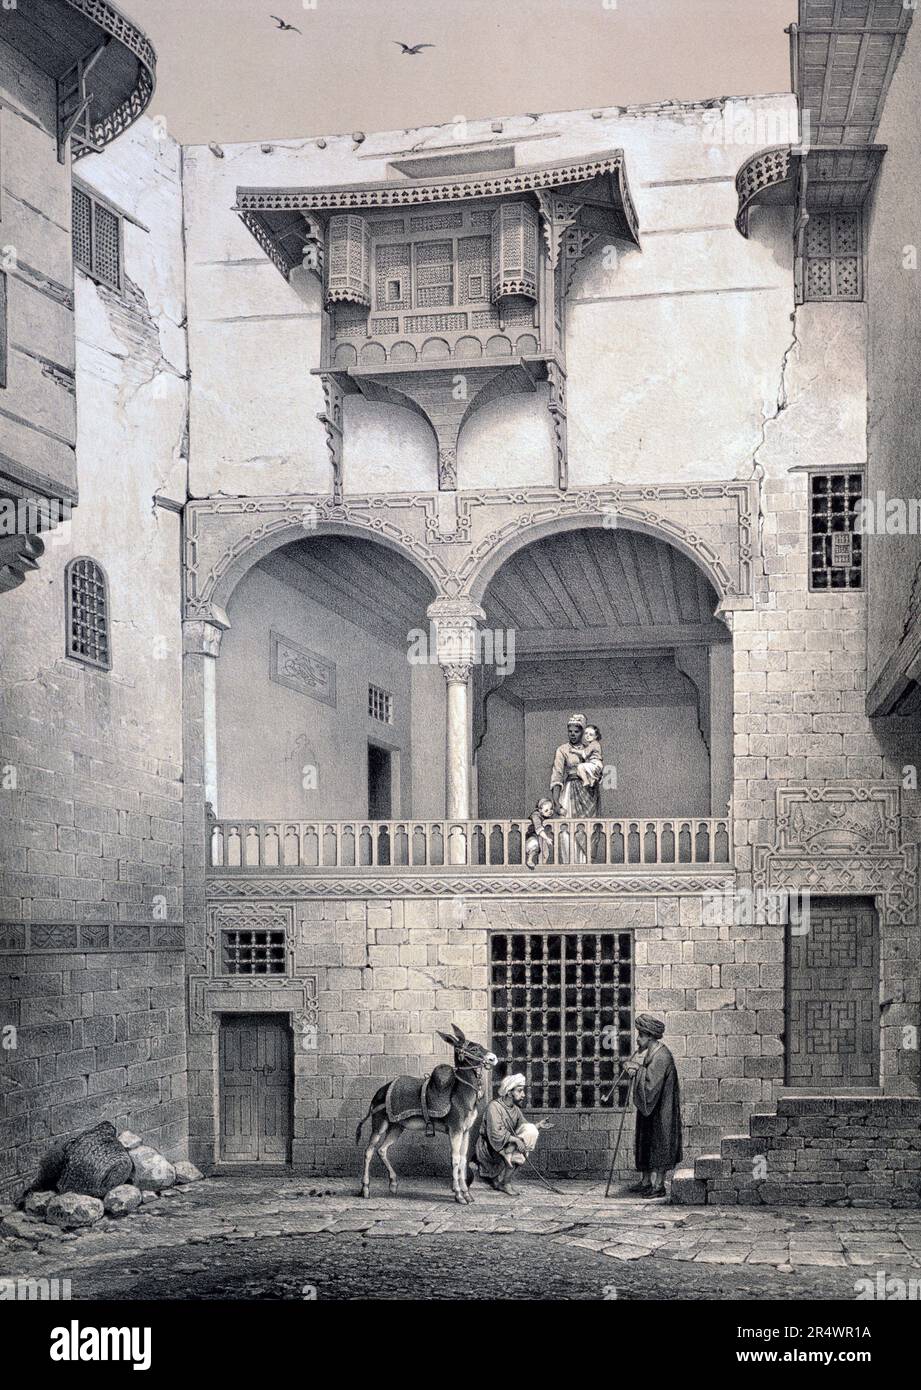 House called Beyt-el-Tcheleby, Cairo, Egypt: Facade overlooking the courtyard, XVIII th century. Lithograph from 'L'Art arabe d'apres les monuments du Caire' 1869-1877 by Emile Prisse d'Avennes, (1807-1879) French architect and engineer. Stock Photo